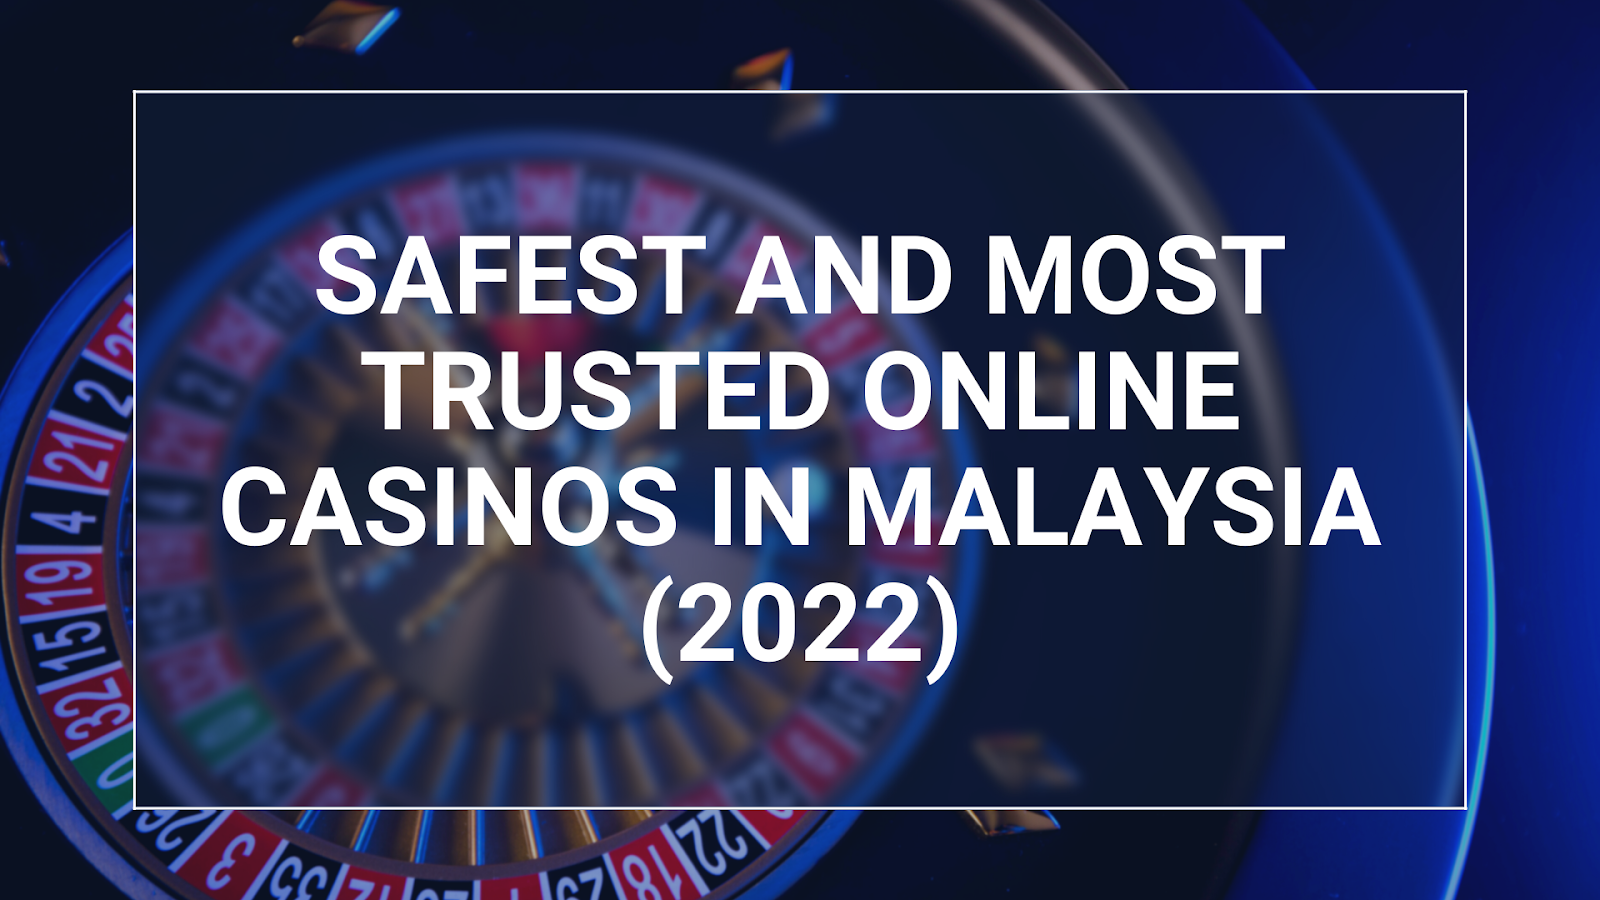 Safest and most trusted online casinos in Malaysia (2022)